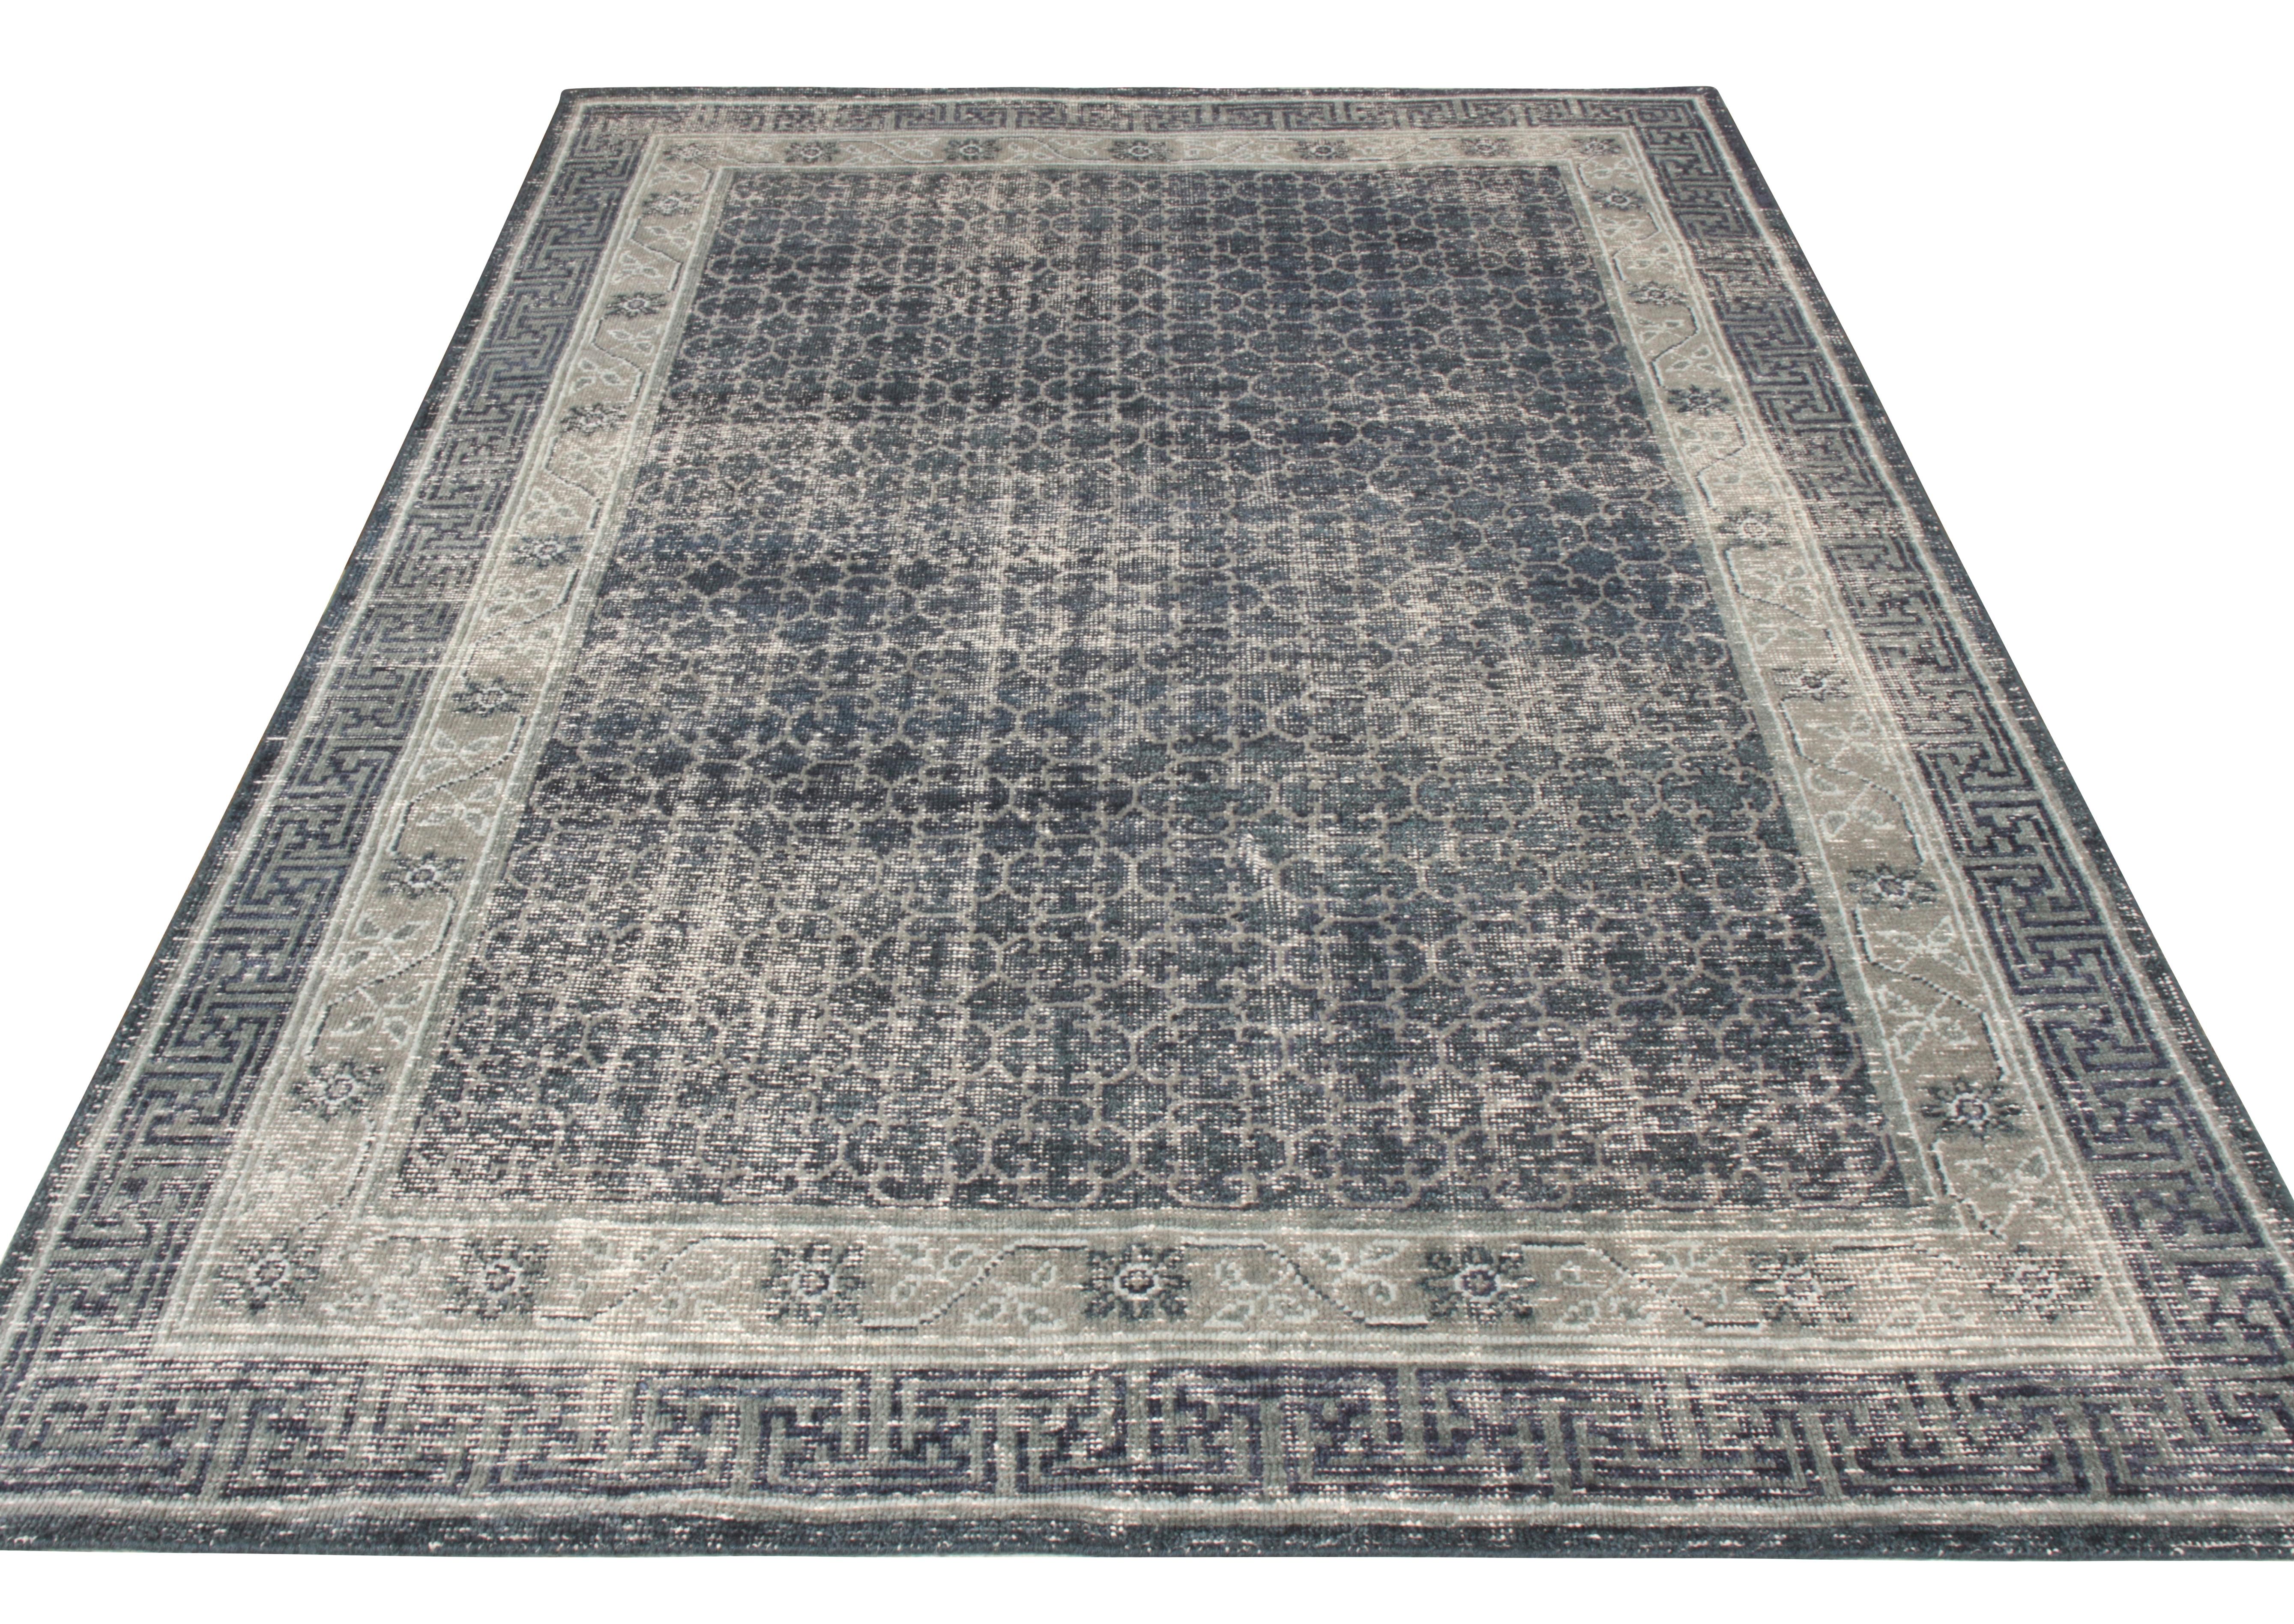 A rich hand knotted wool rug from Rug & Kilim’s Homage collection. Spanning across a 6x9 scale, this distressed style rug witnesses a thoughtful play of mature blue and gray-silver colorway gracefully complimenting the intricate geometric pattern